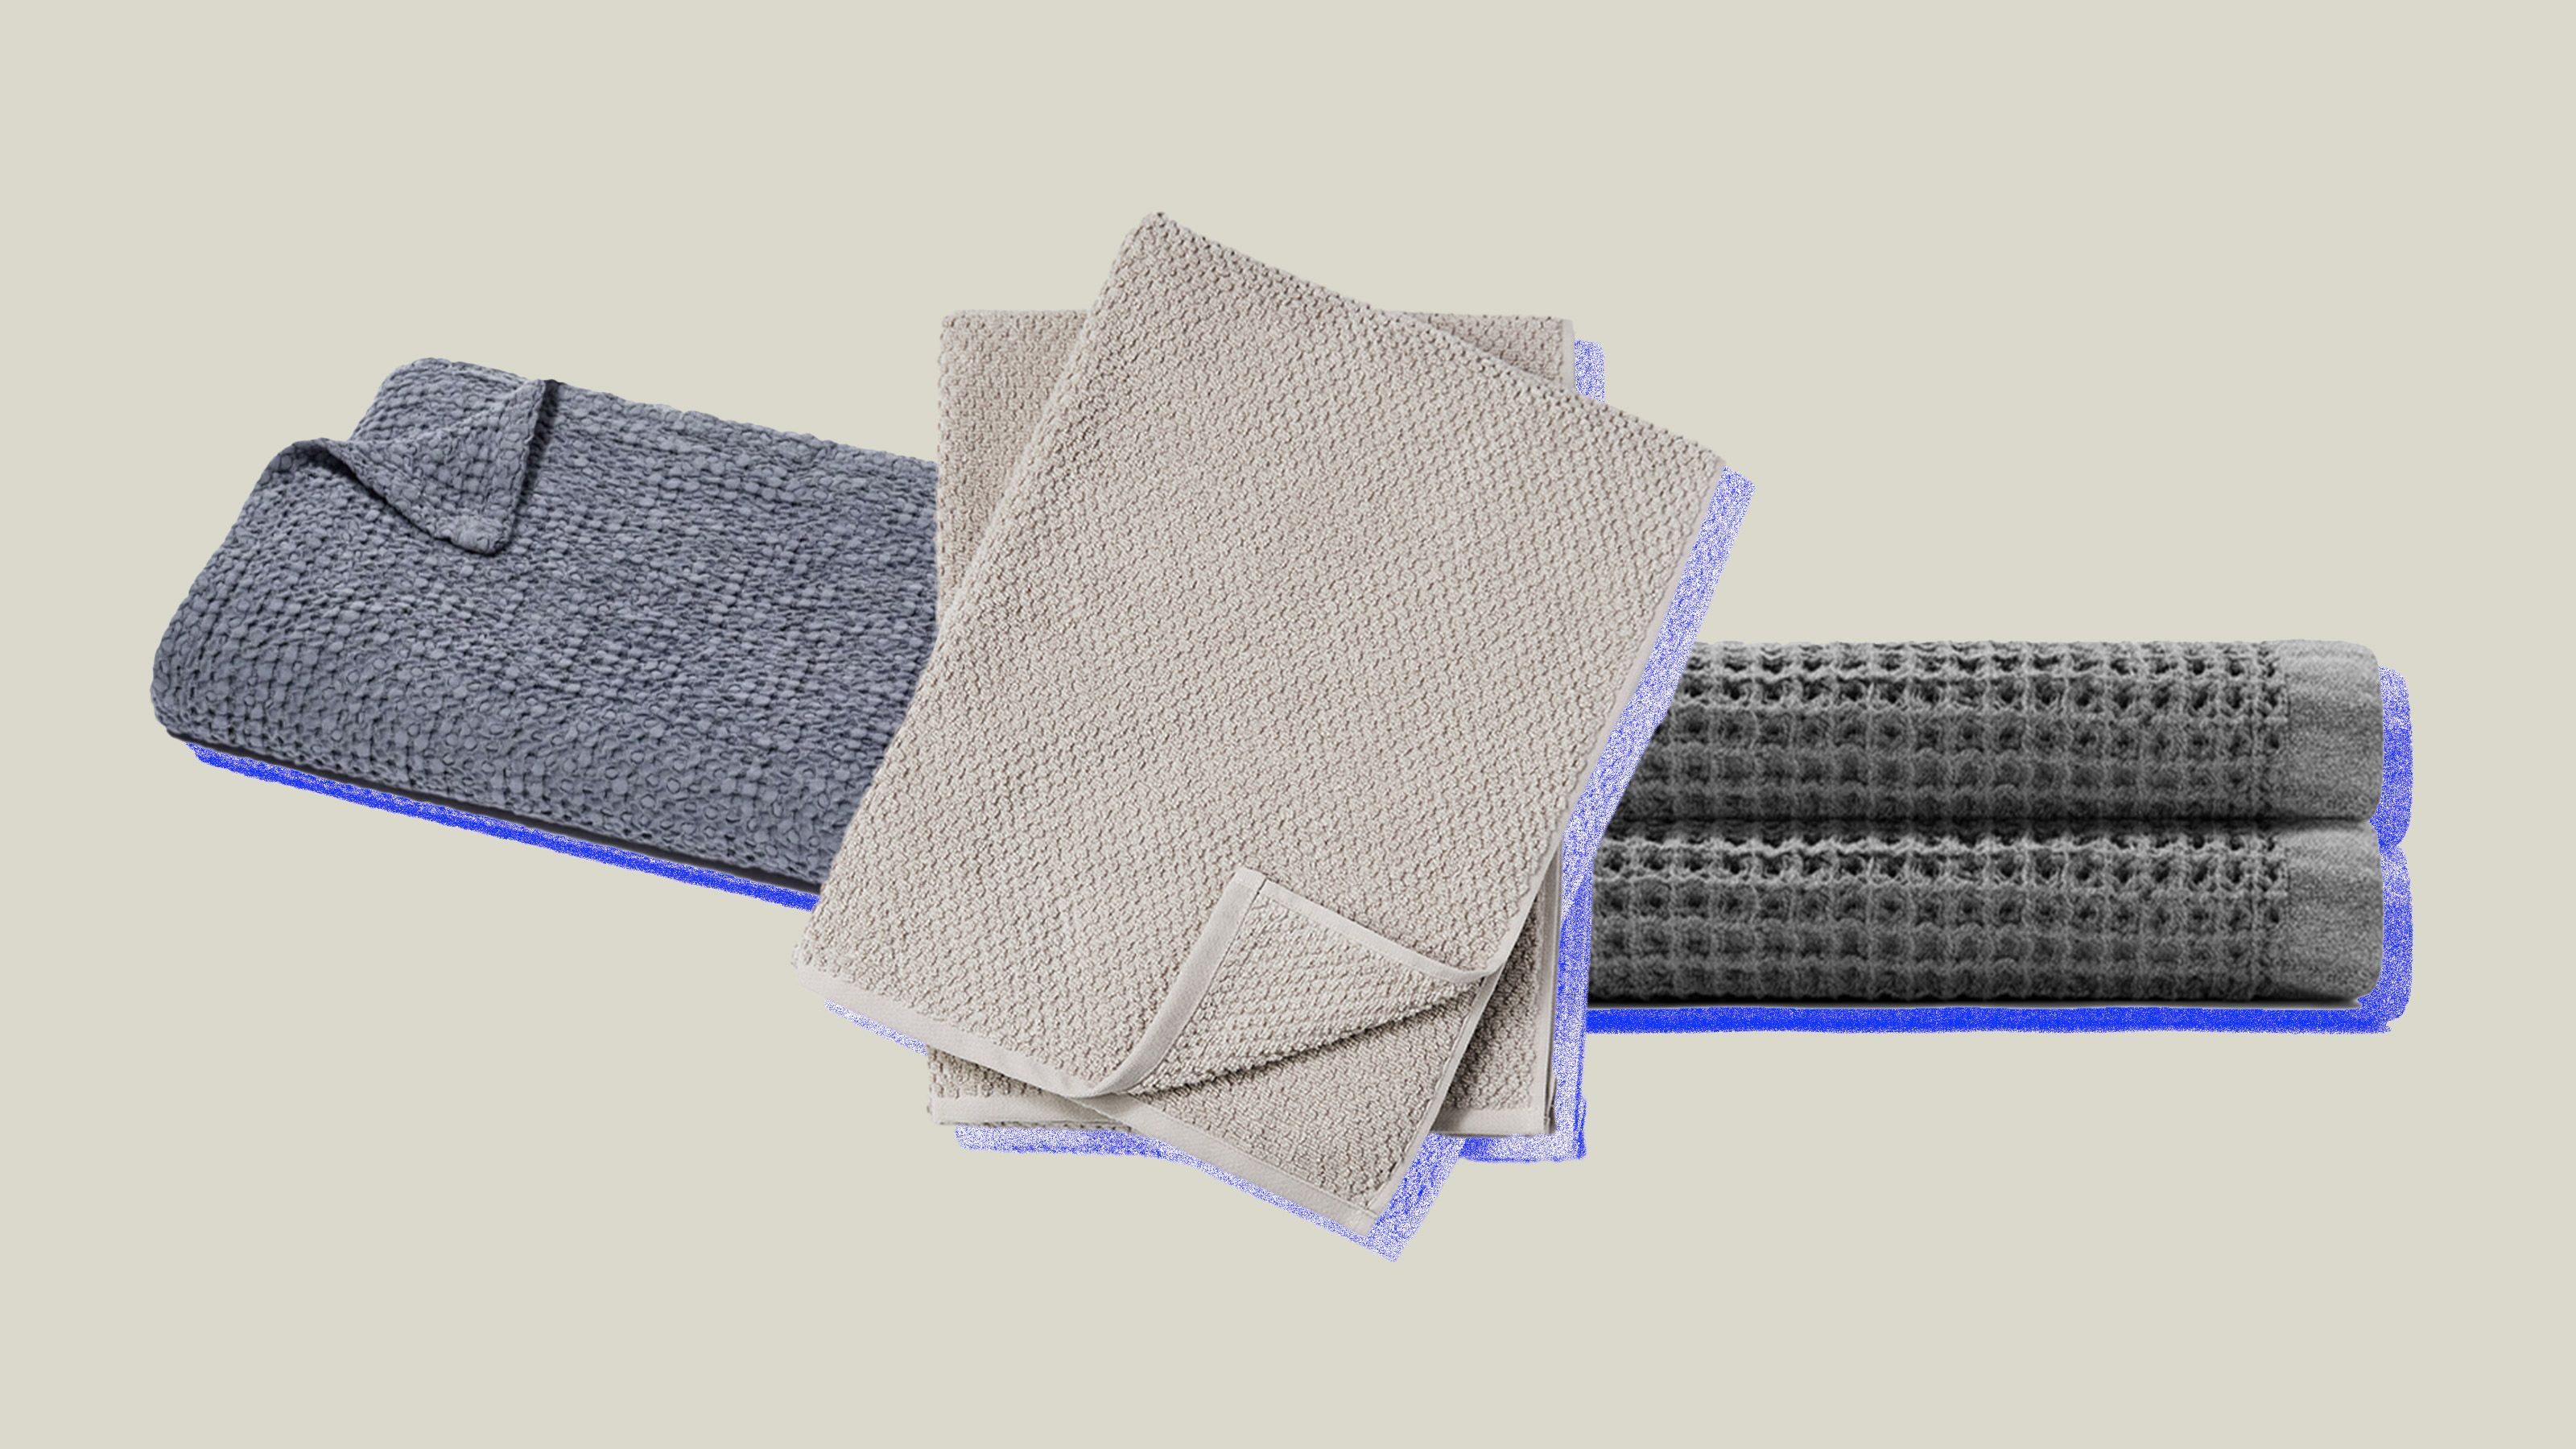 Onsen Bath Towels Are on Sale on Huckberry Right Now - Men's Journal